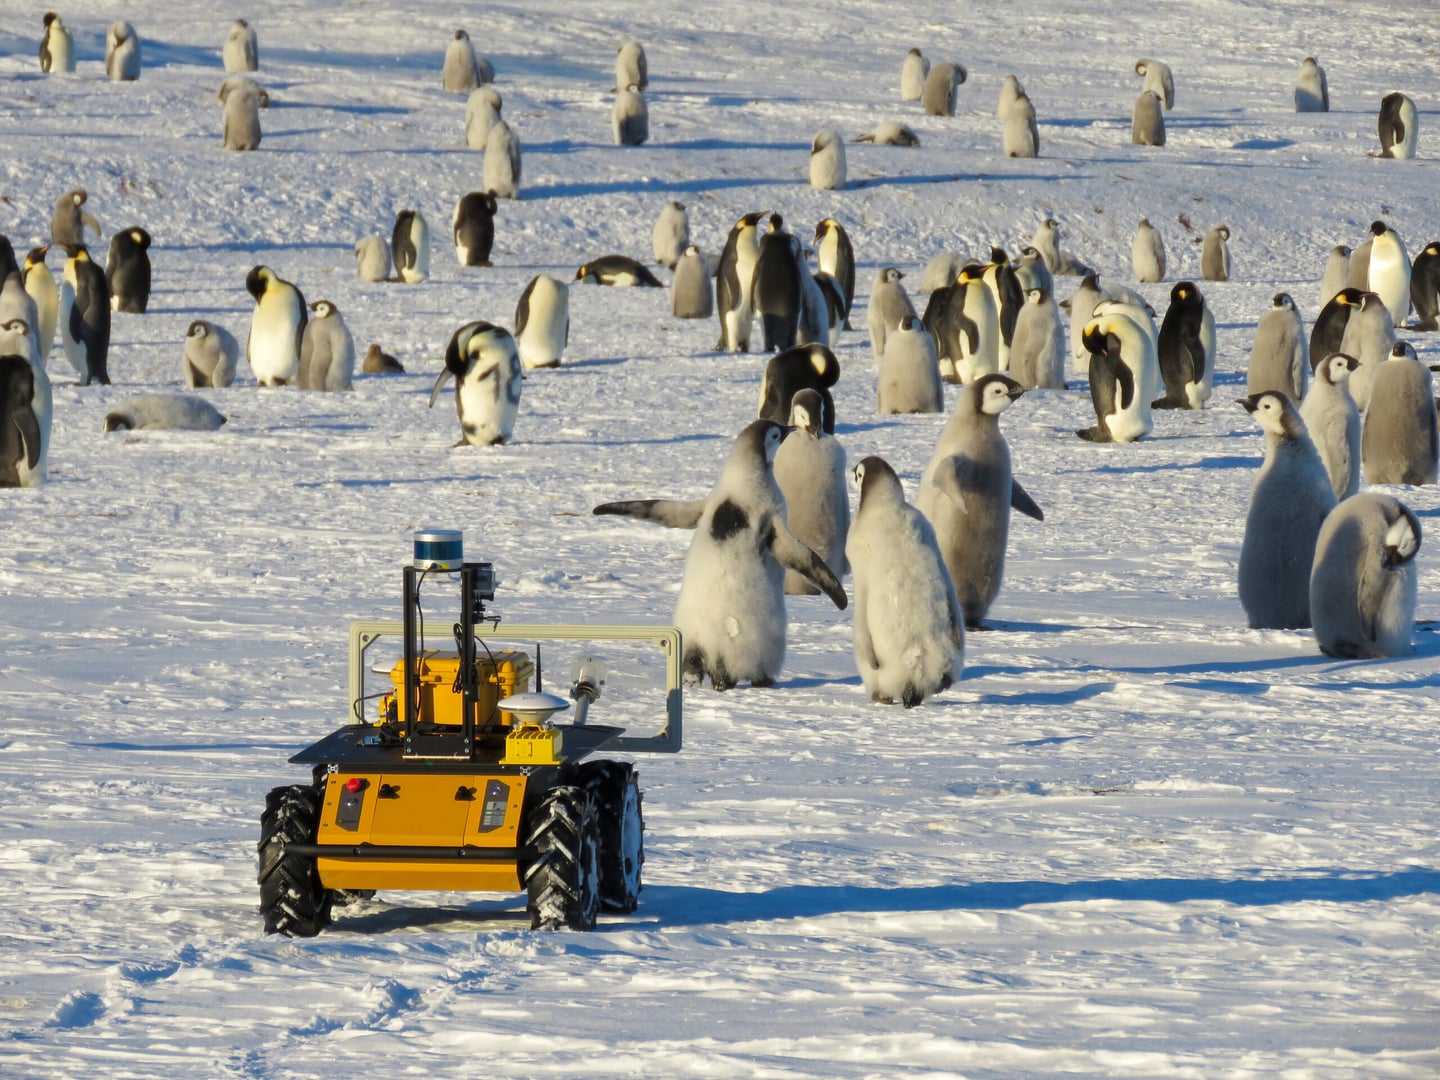 a yellow wheeled robot approaches a colony of penguins in the snow